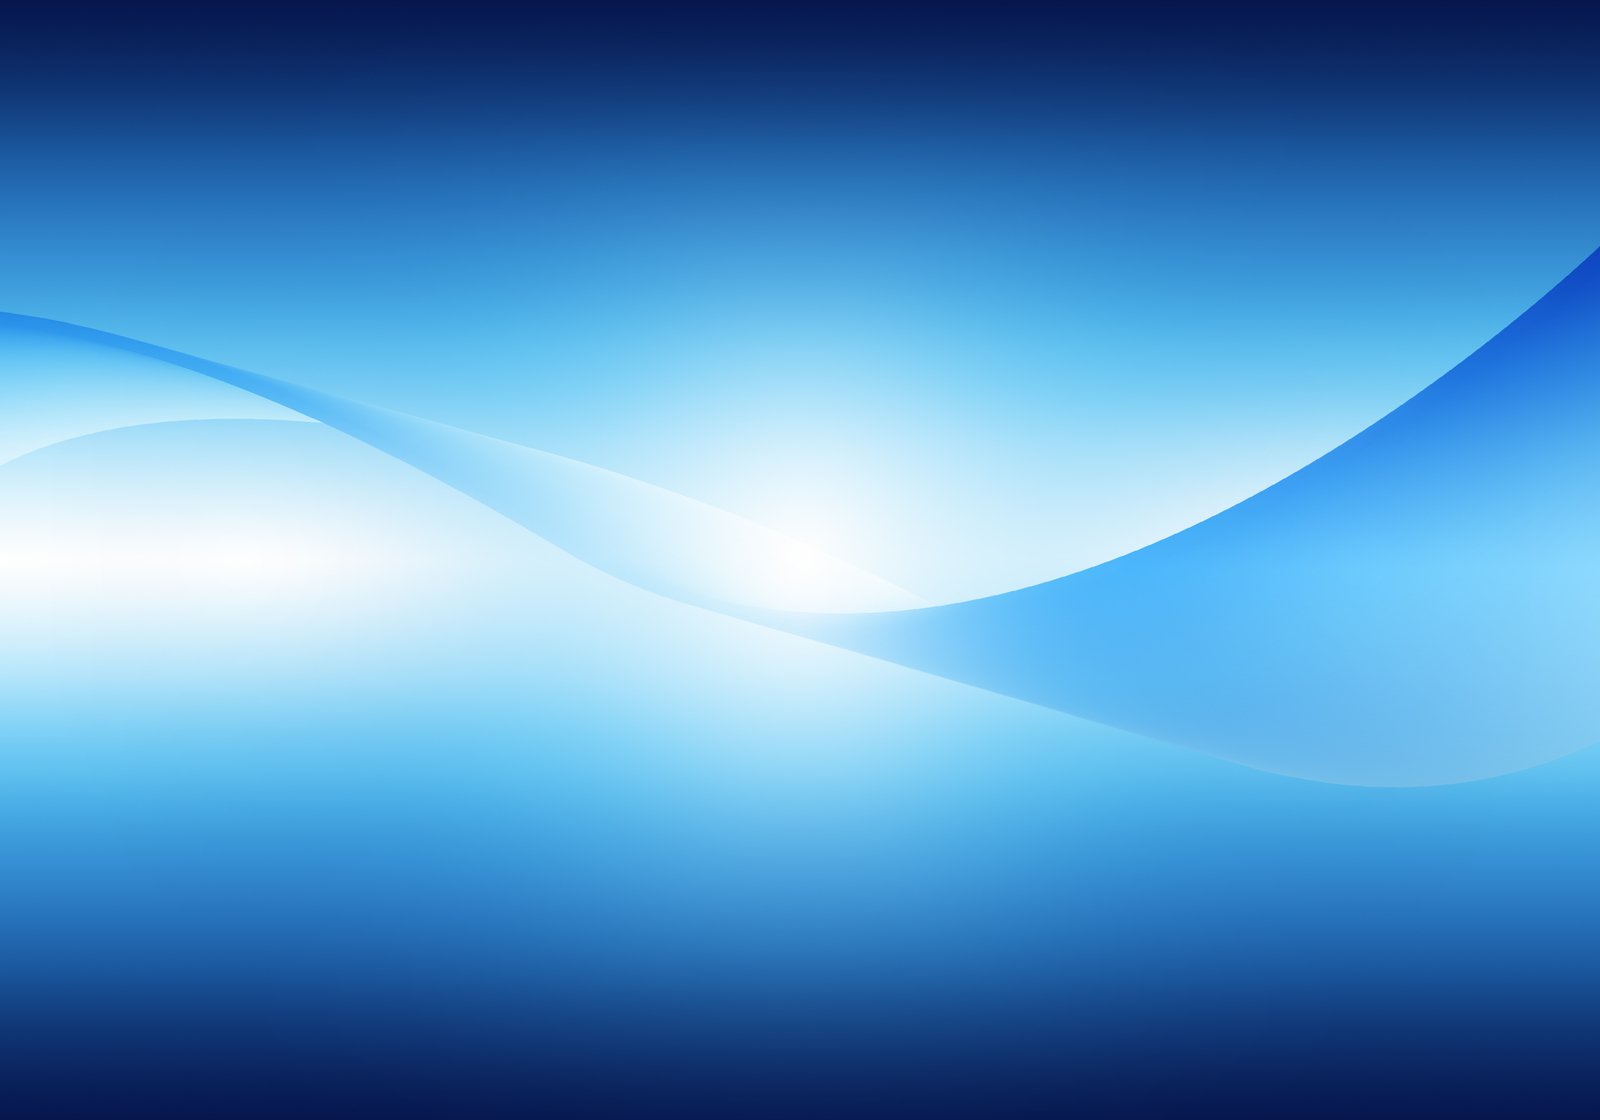 blue abstract wave background with sunlight